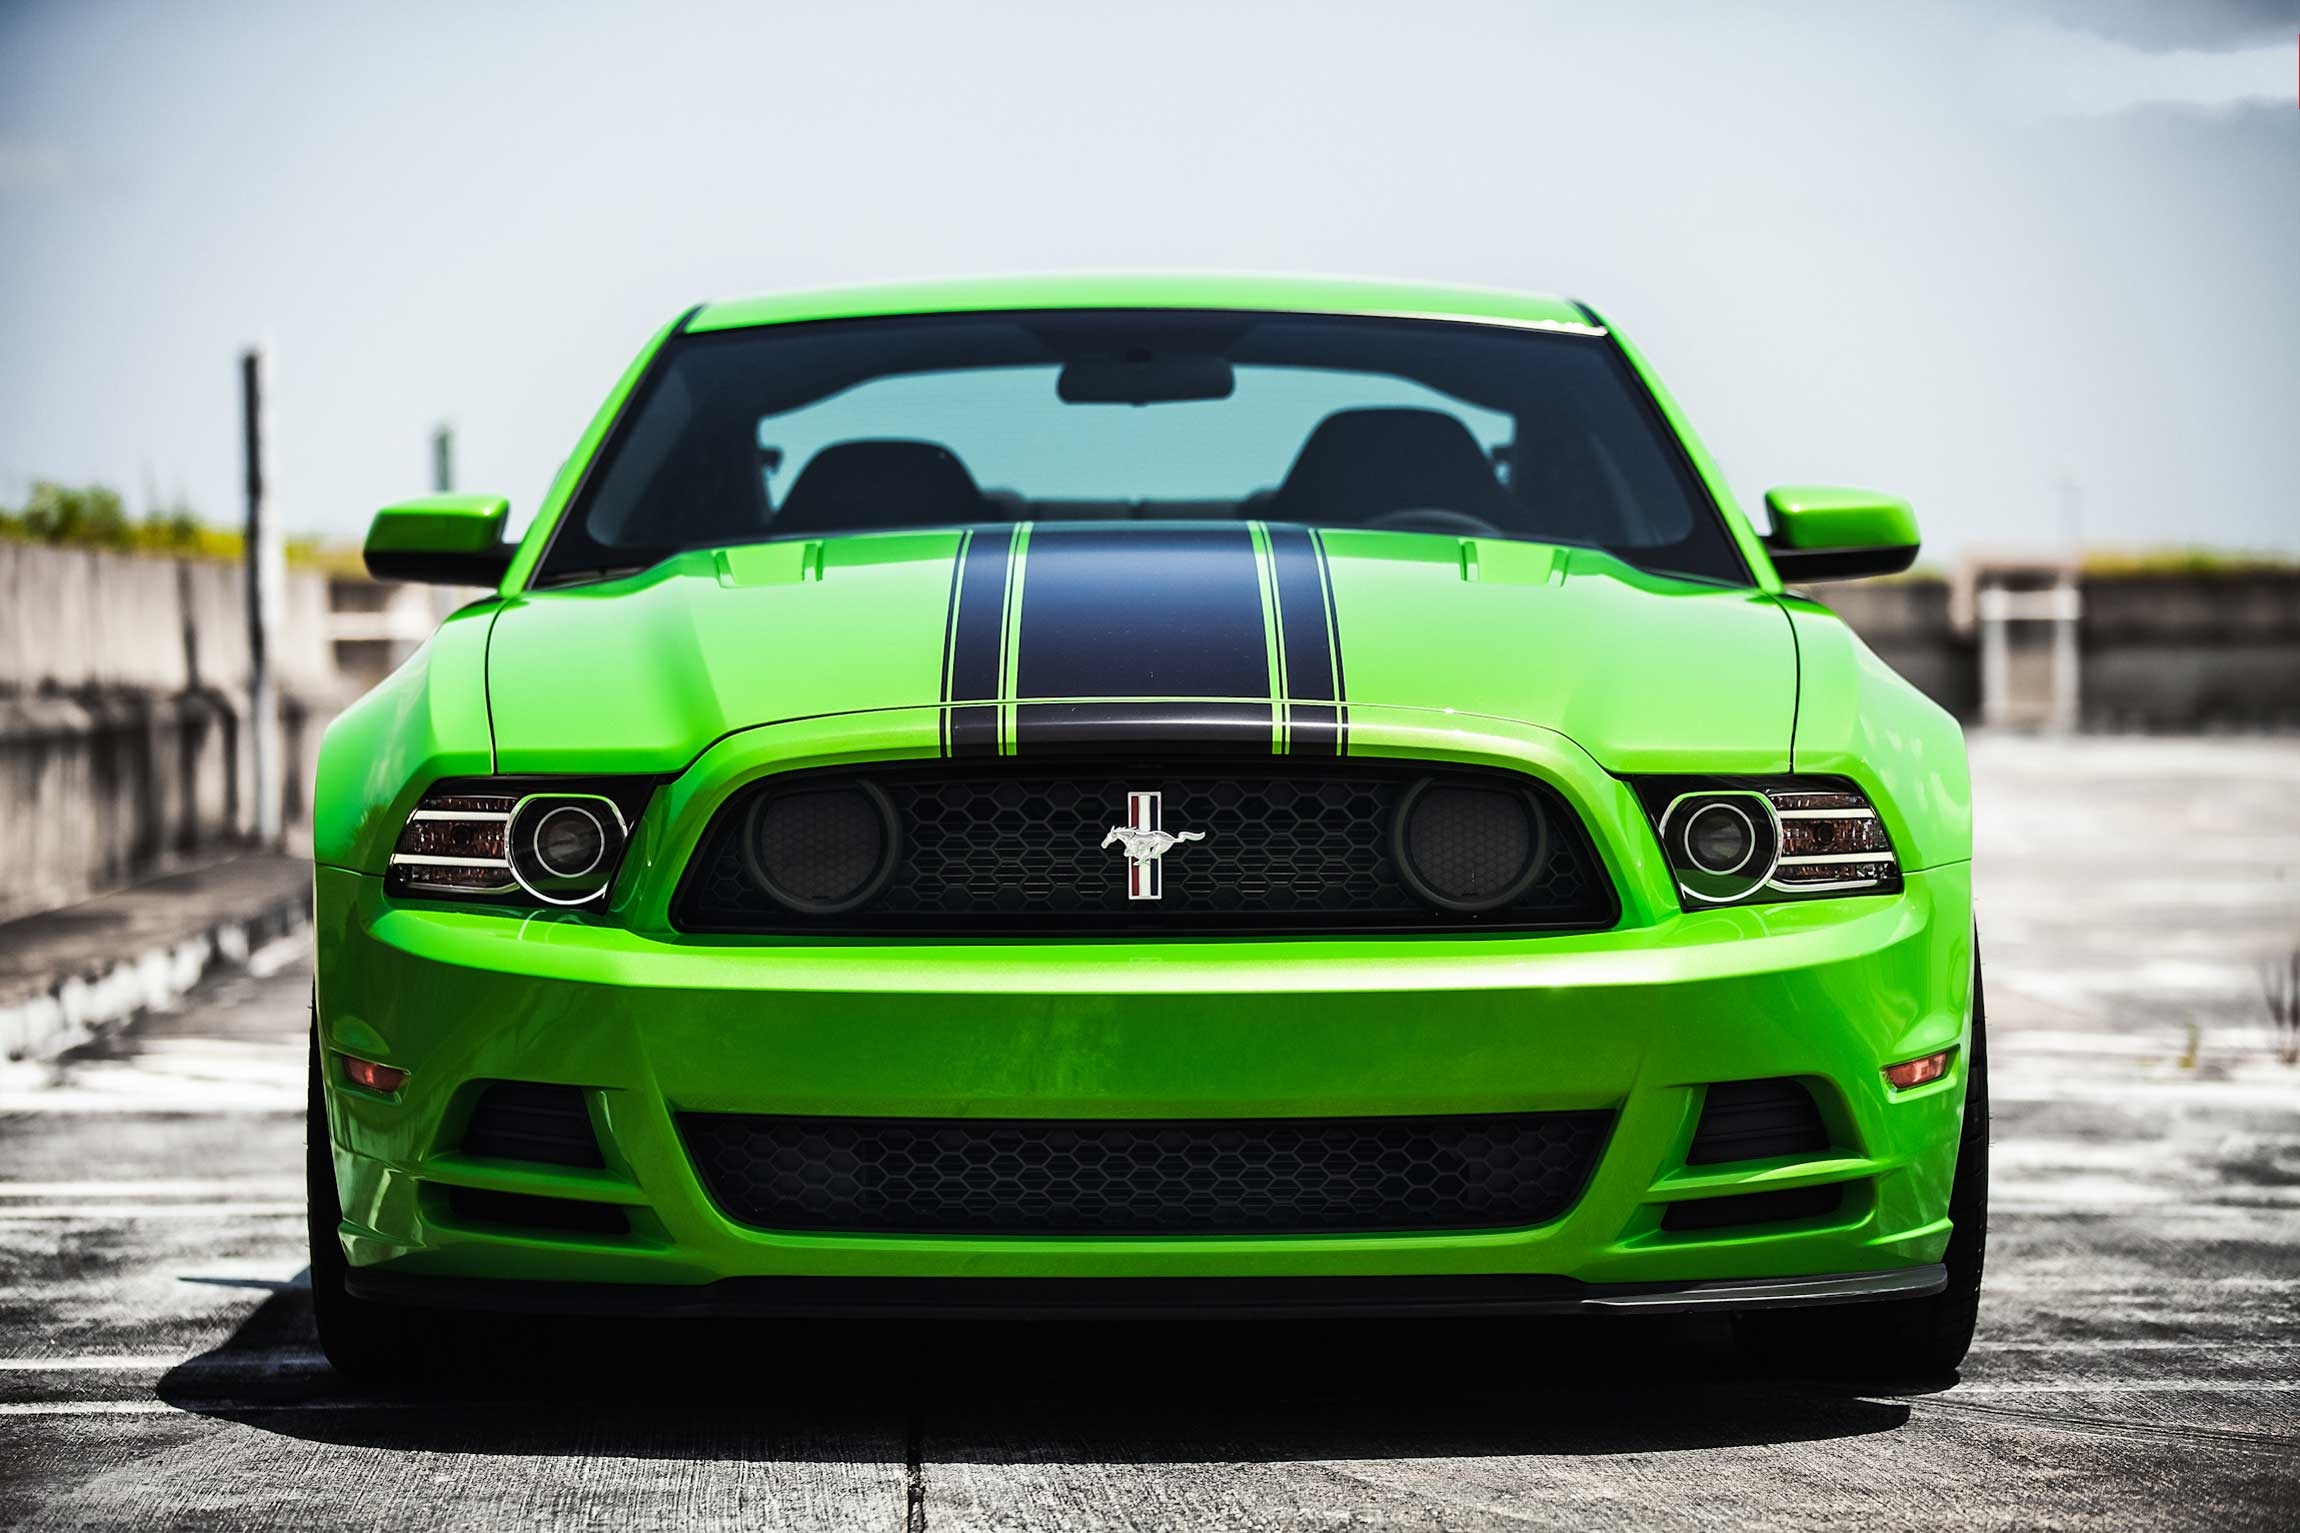 Ford Mustang V6 Wallpapers